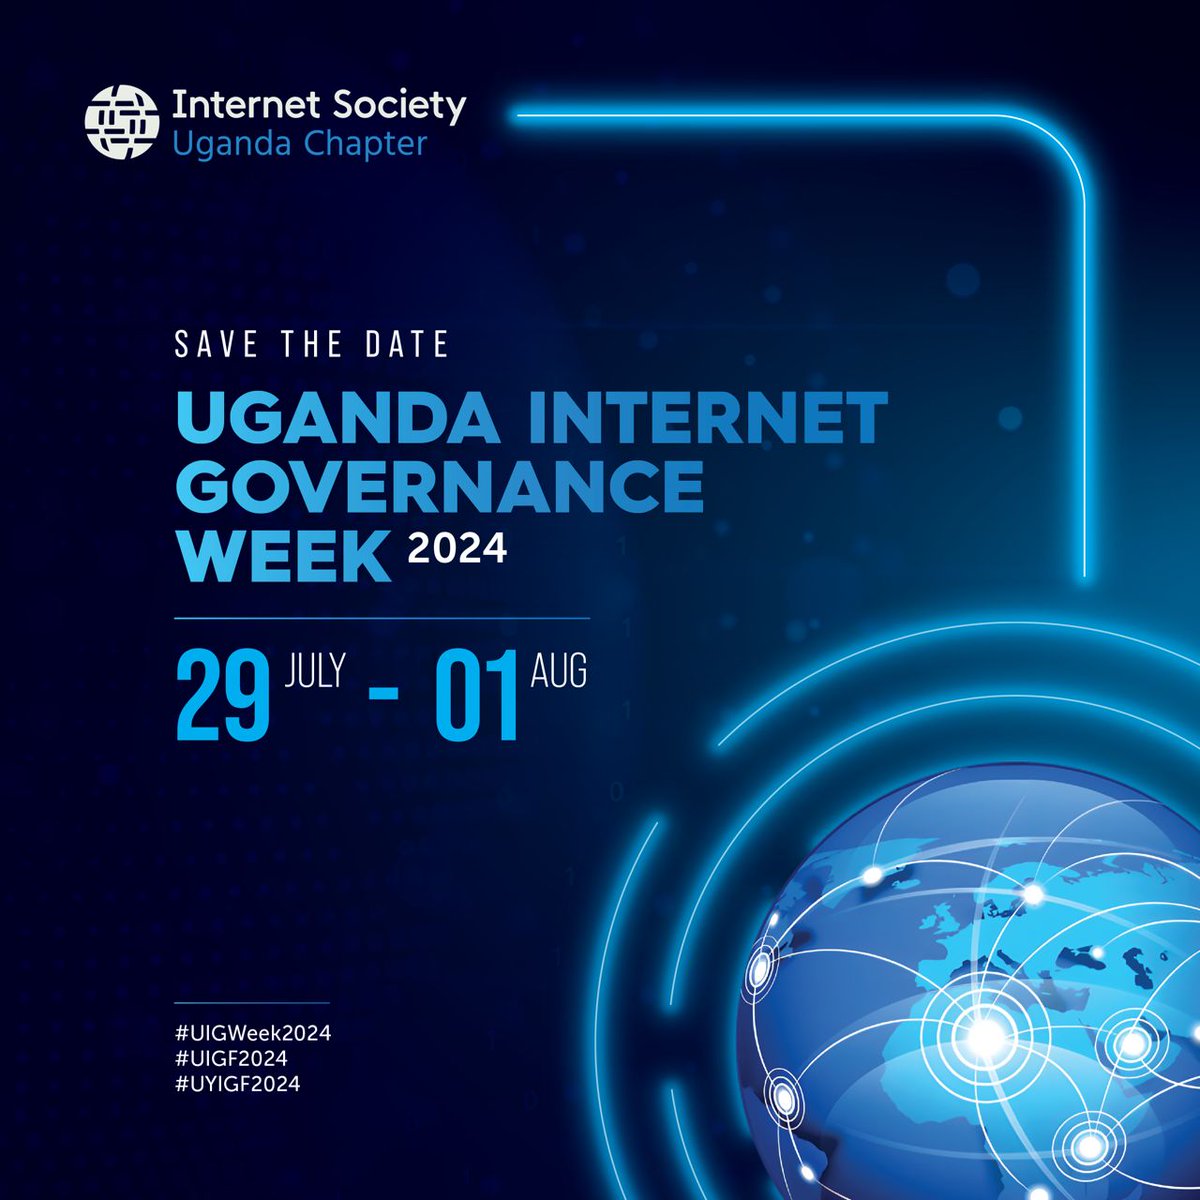 Mark your calendars! The #UIGWeek2024 is set to run July 29 - August 01, 2024. Stay tuned for more updates. @ICANN @ISOC_Foundation @ISOC_Africa @MoICT_Ug @UIXP @UICTug @UCC_Official @NITAUganda1 @PollicyOrg @cipesaug @intgovforum